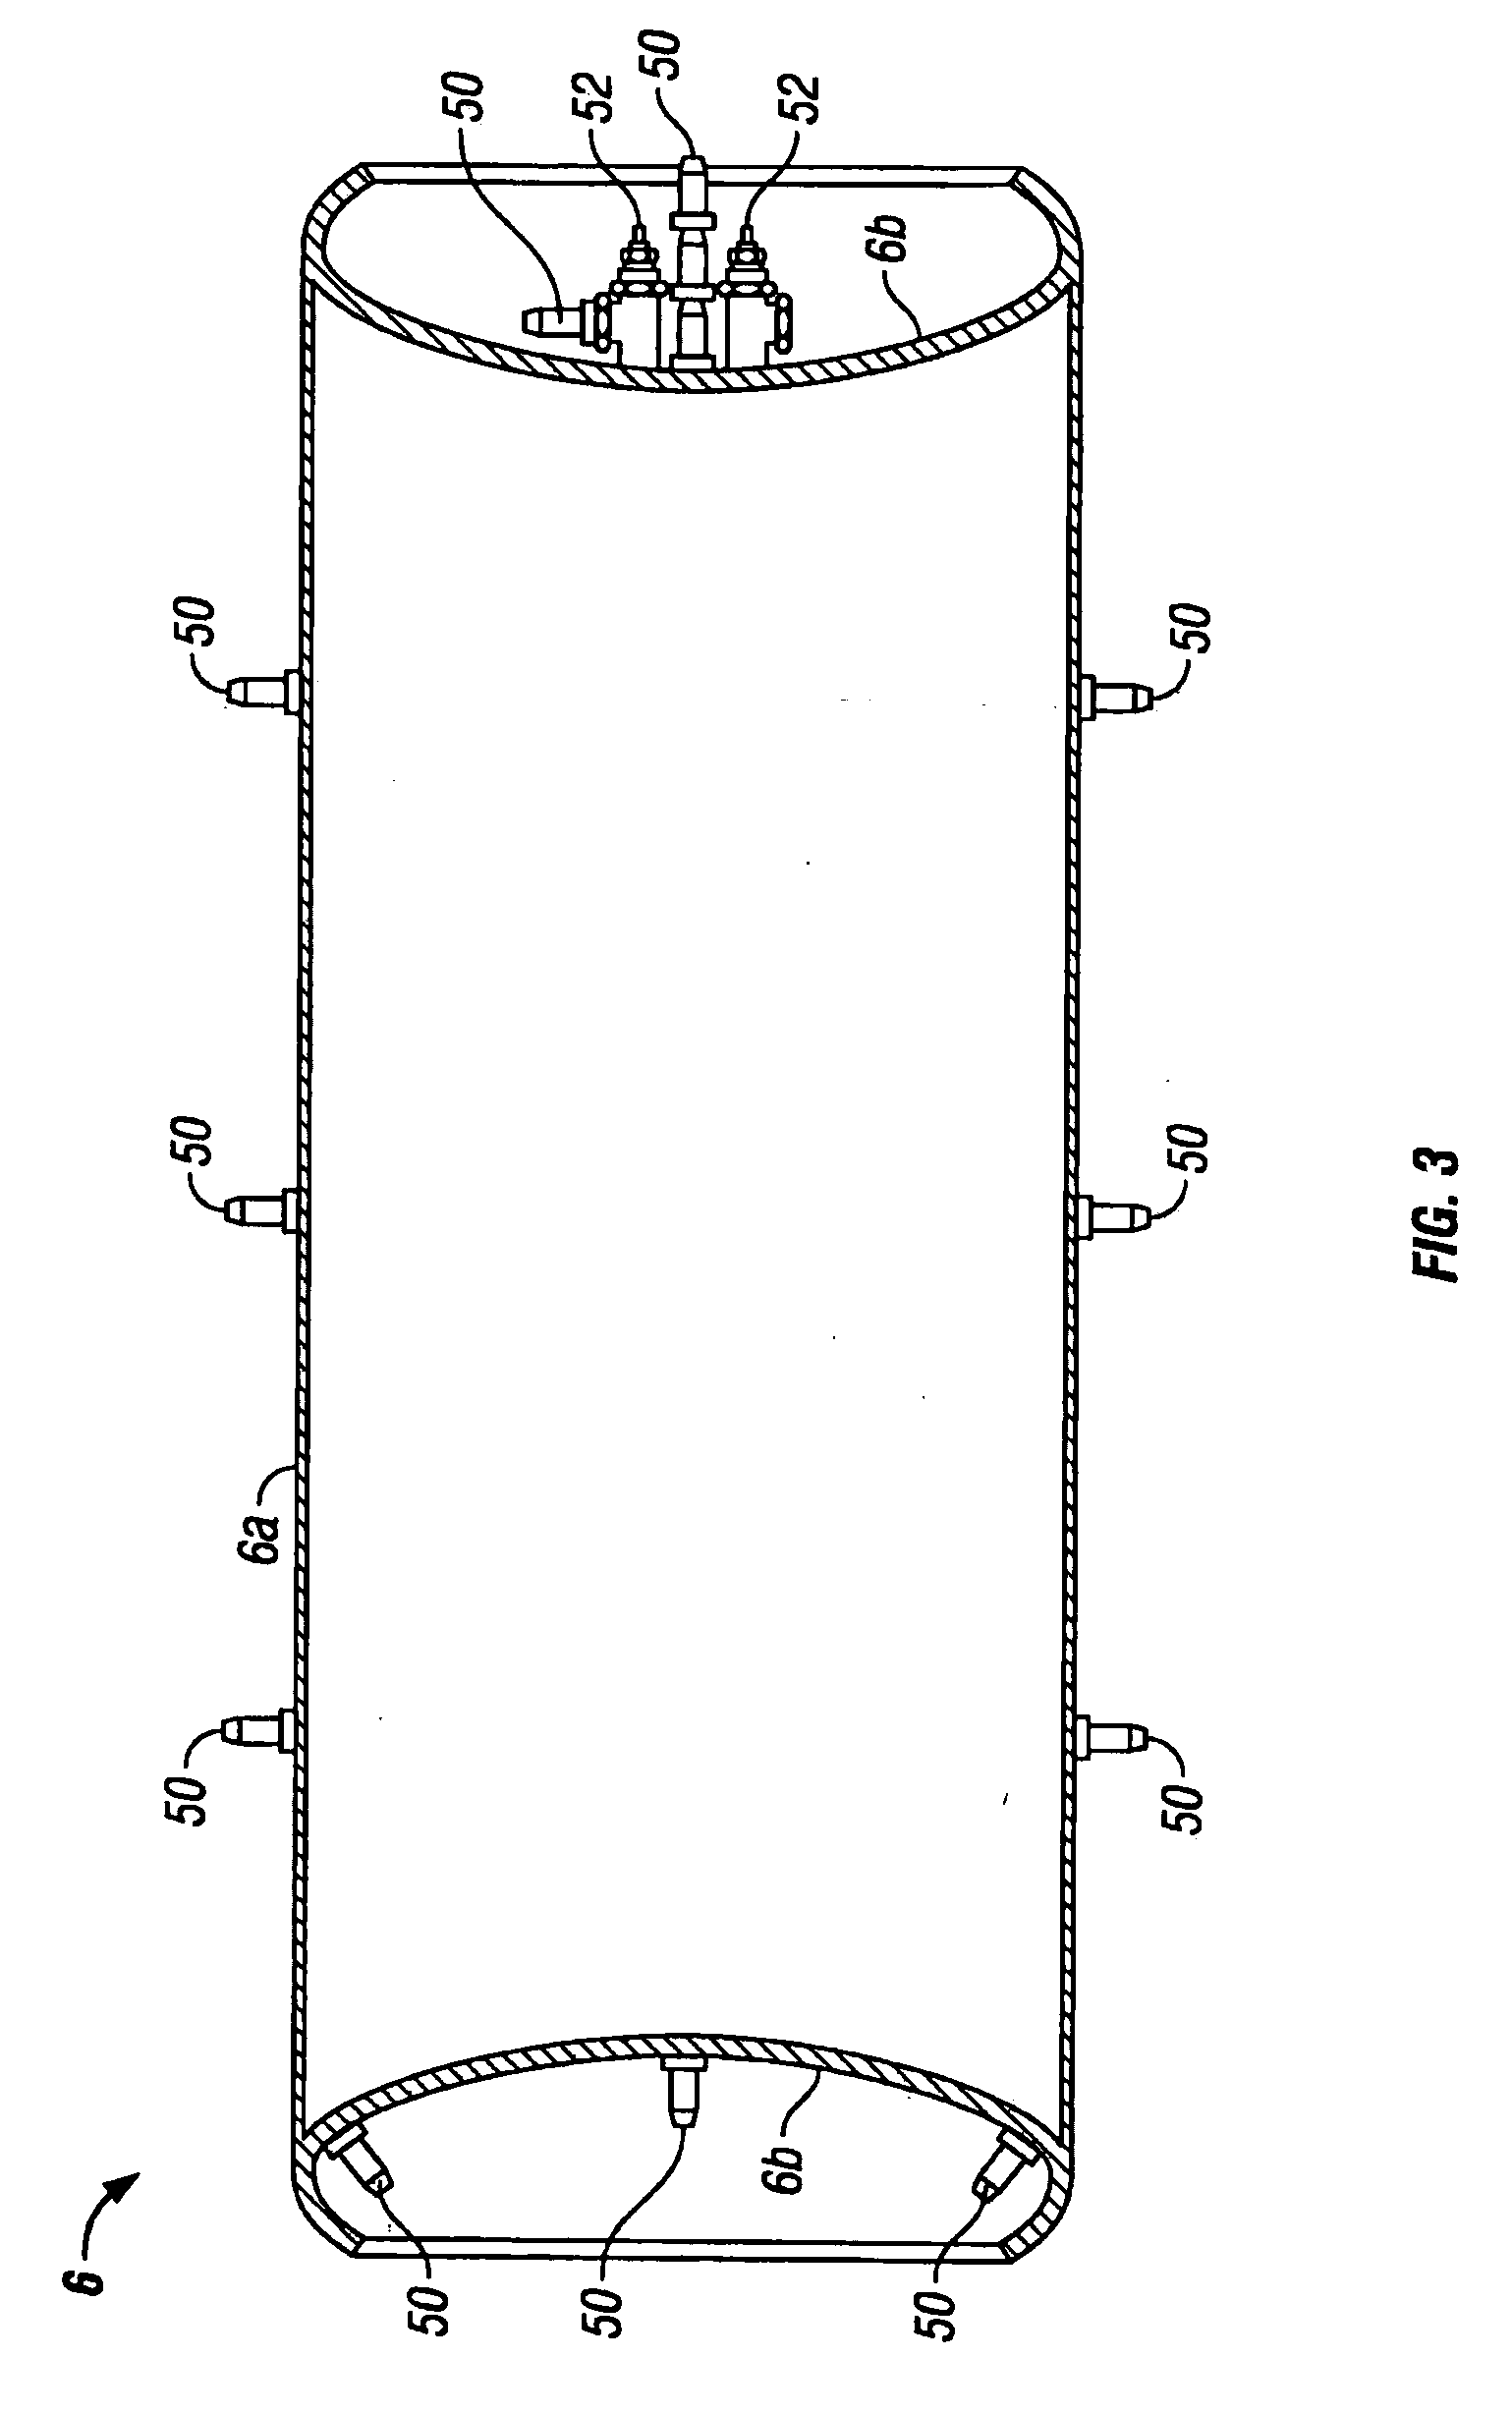 Inductive heating of workpiece using coiled assemblies, system and method